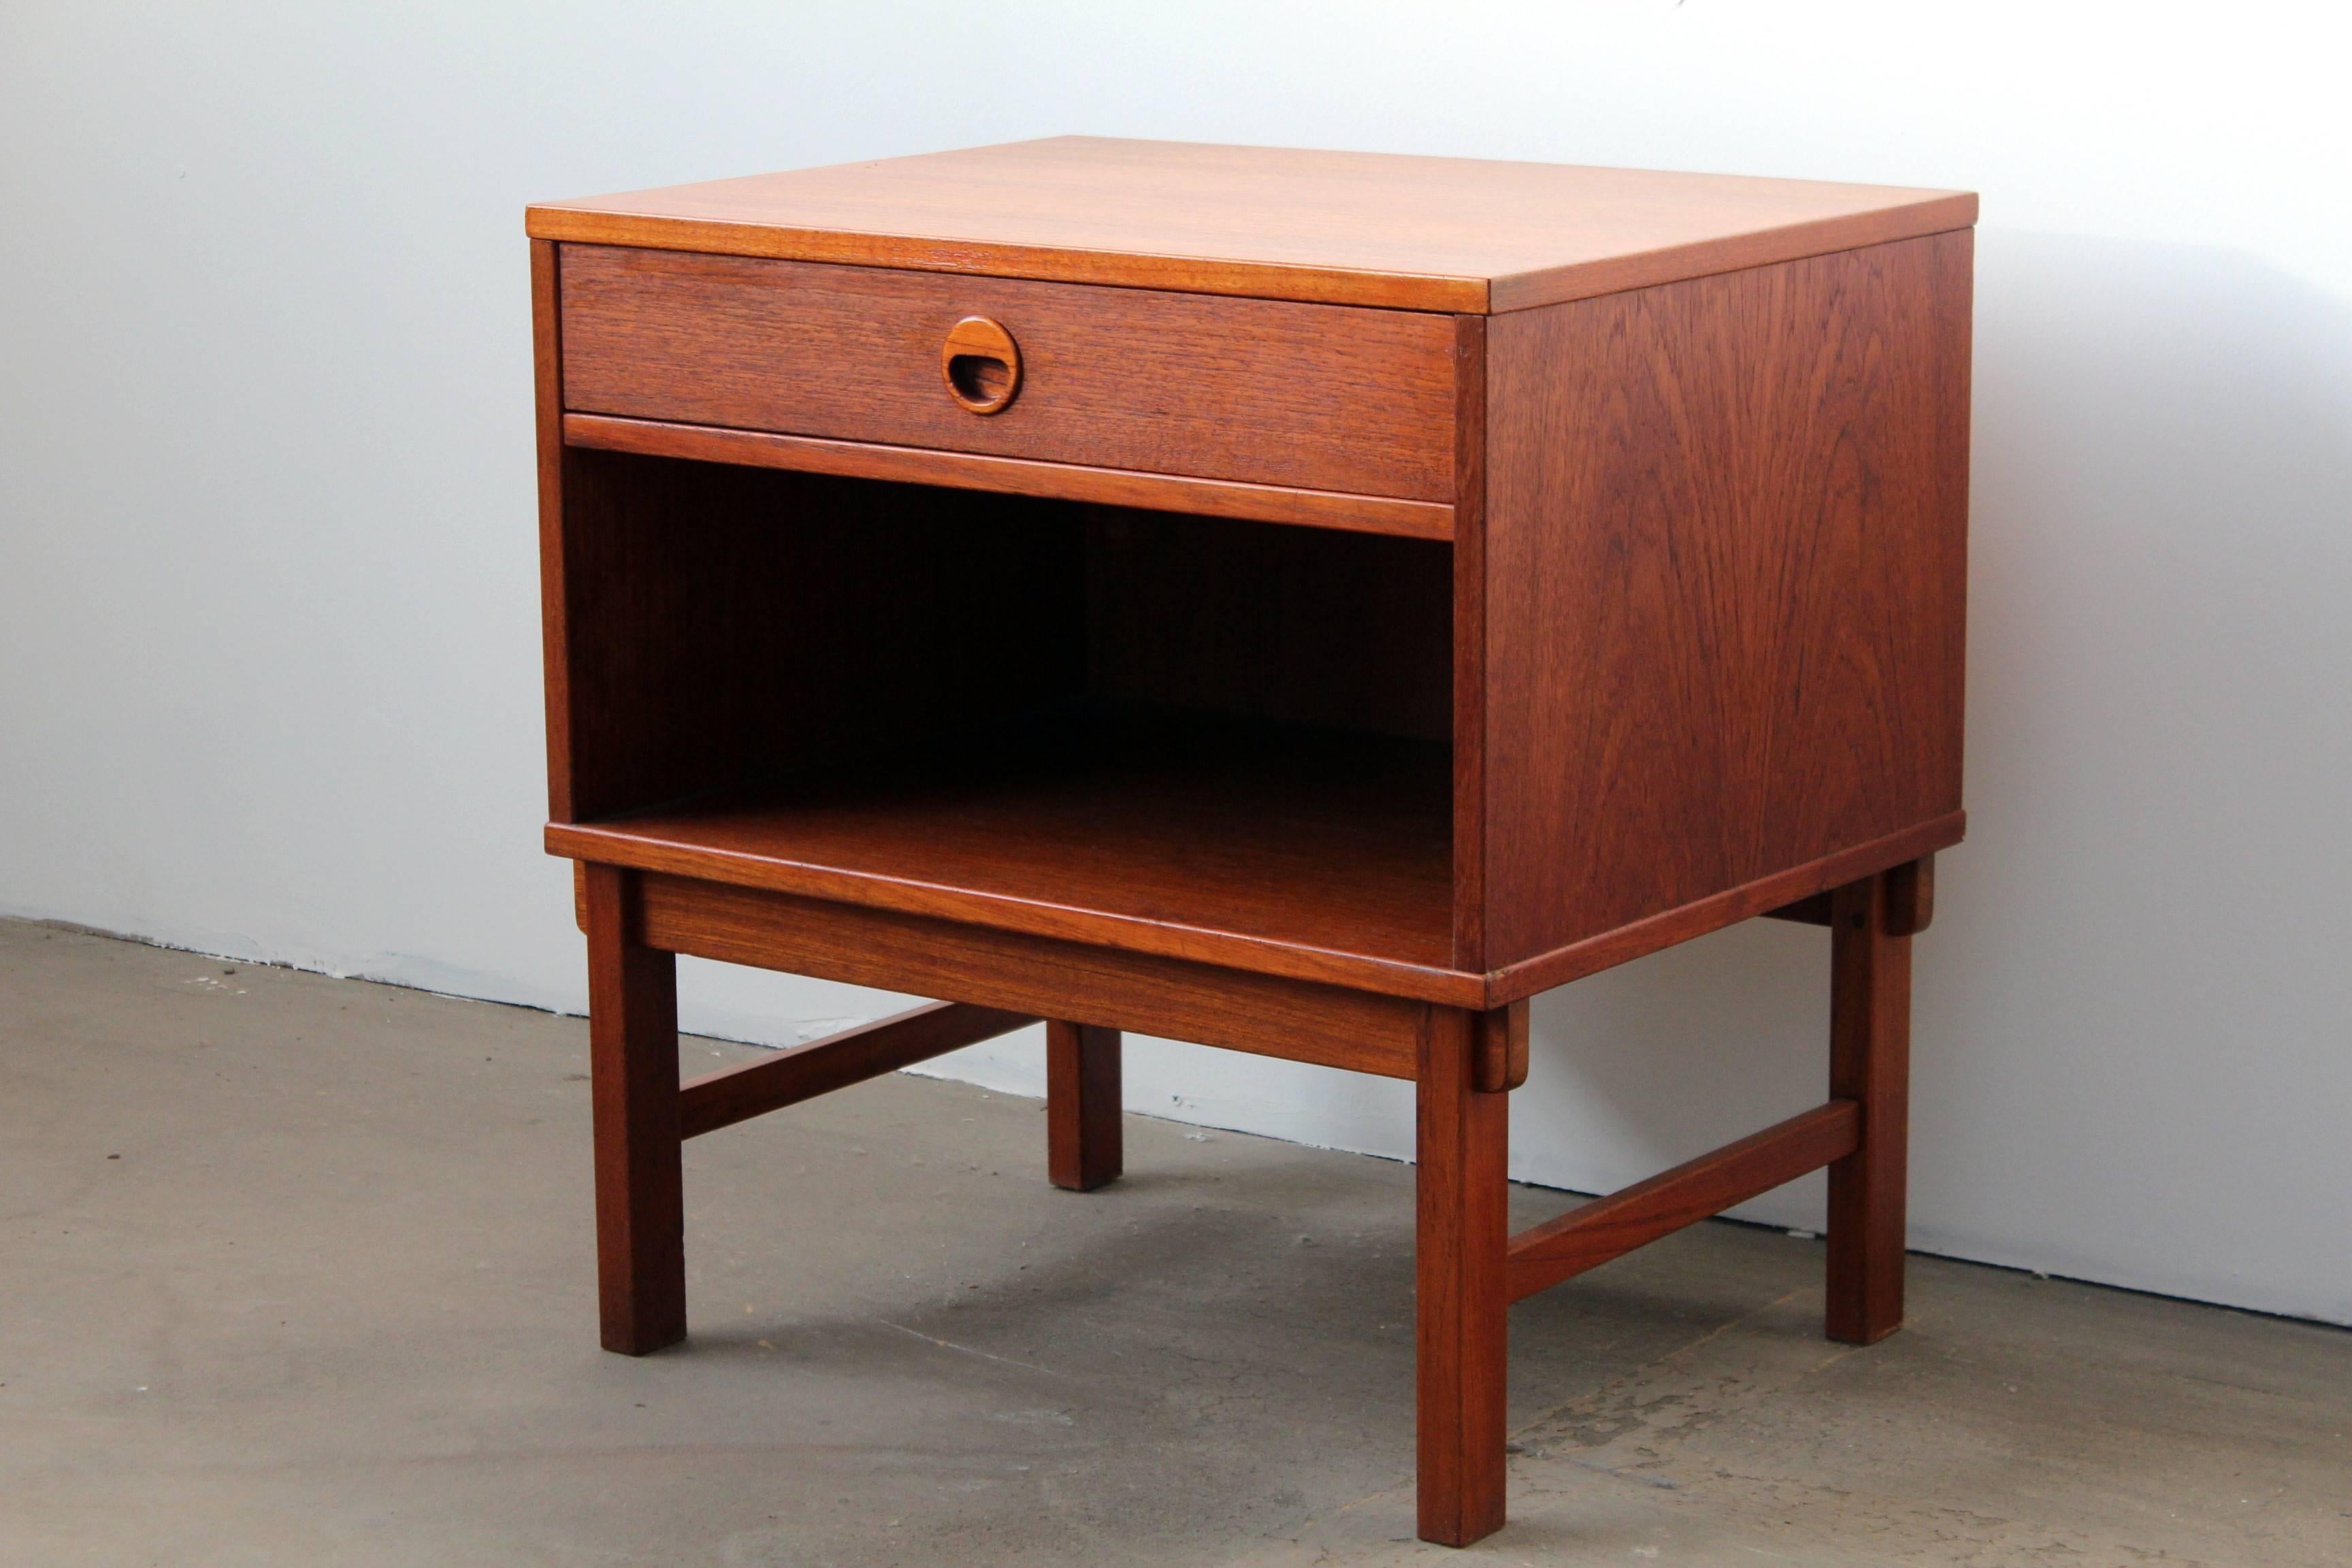 This teak side table or nightstand, manufactured by Dux, speaks to a quiet, simple elegance; note the single drawer. The perfect finishing touch in your New York apartment or loft space.